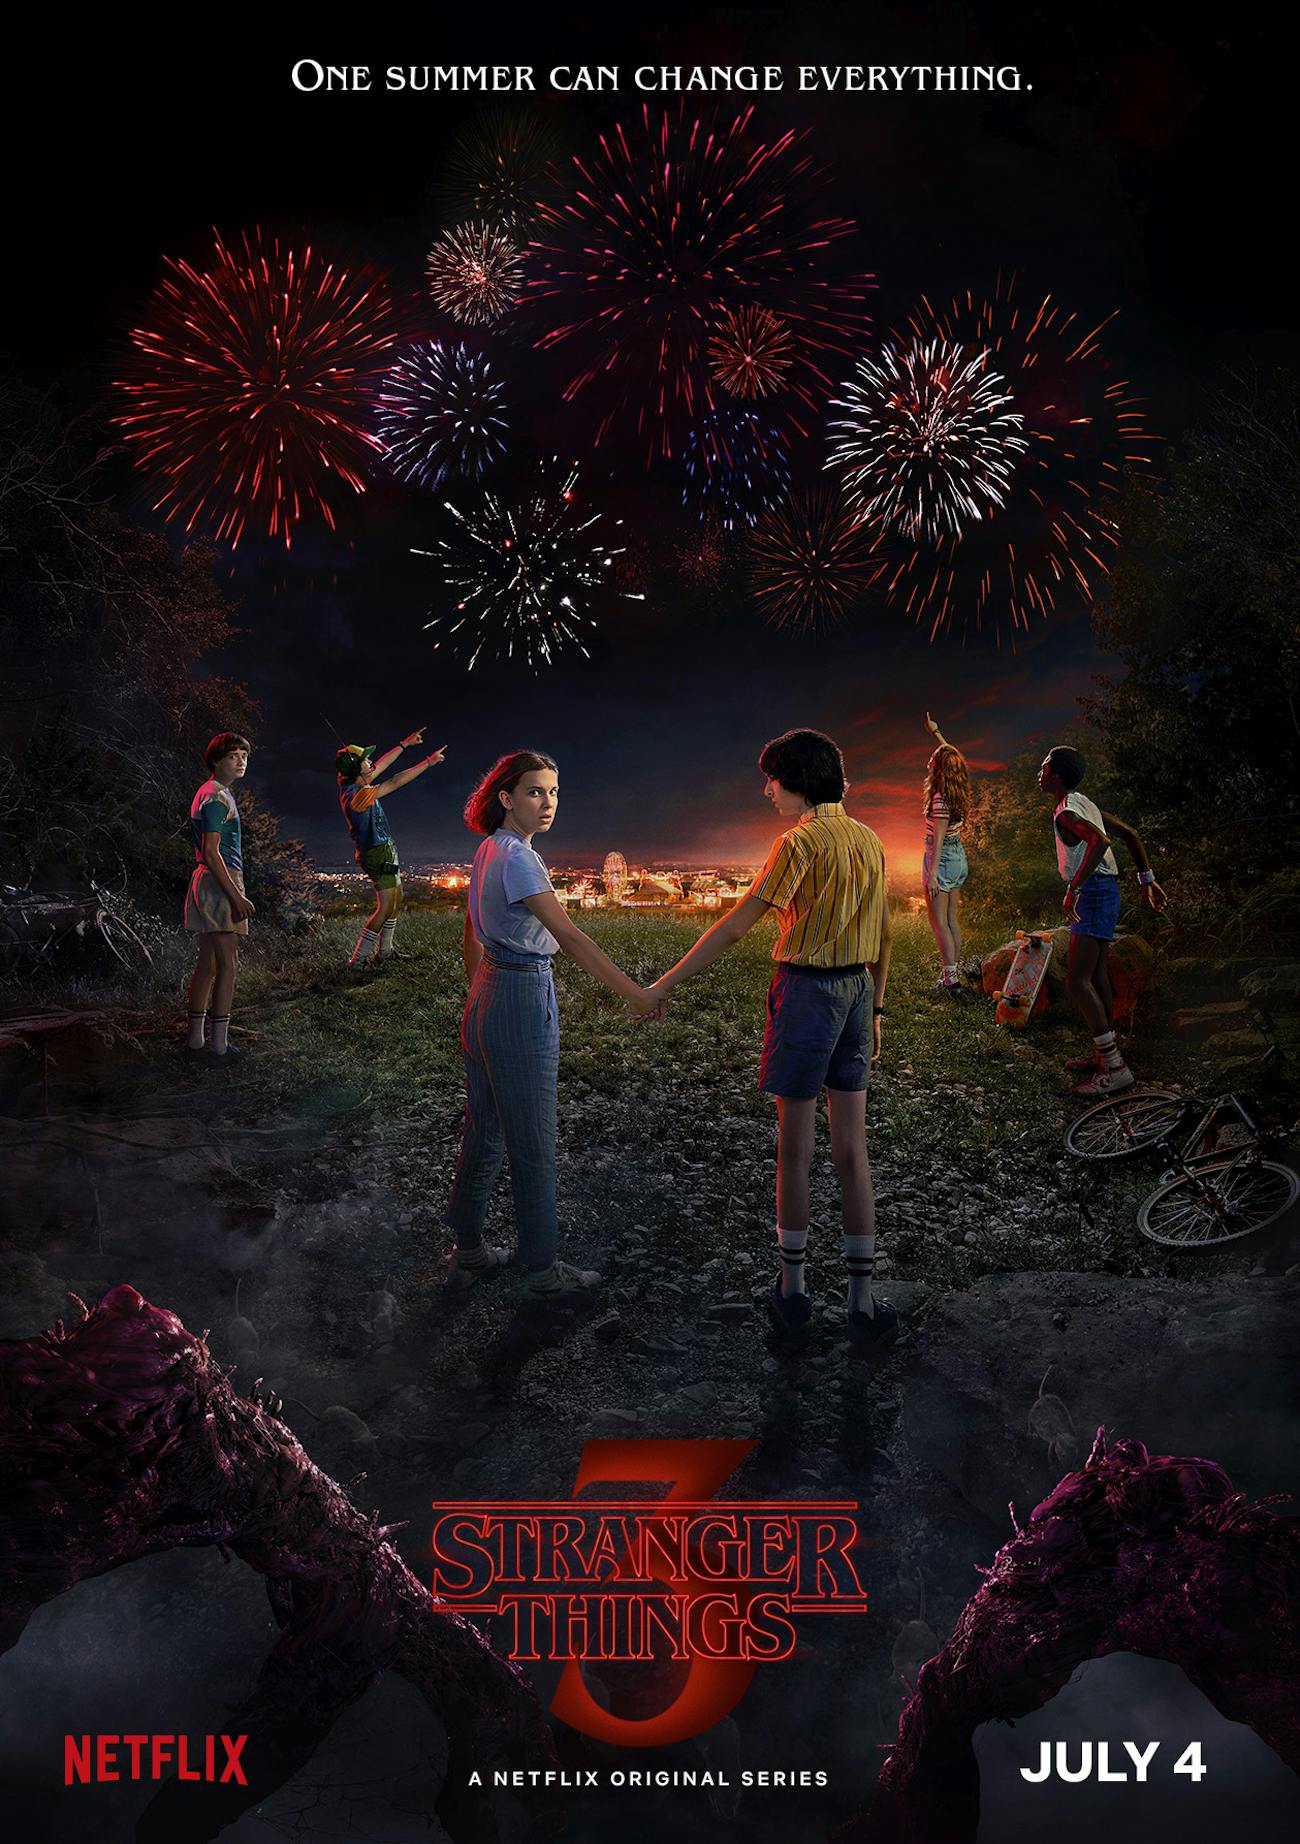 'Stranger Things' Season 3 Spoilers: 5 Huge Clues in the Trailer and Poster | Inverse